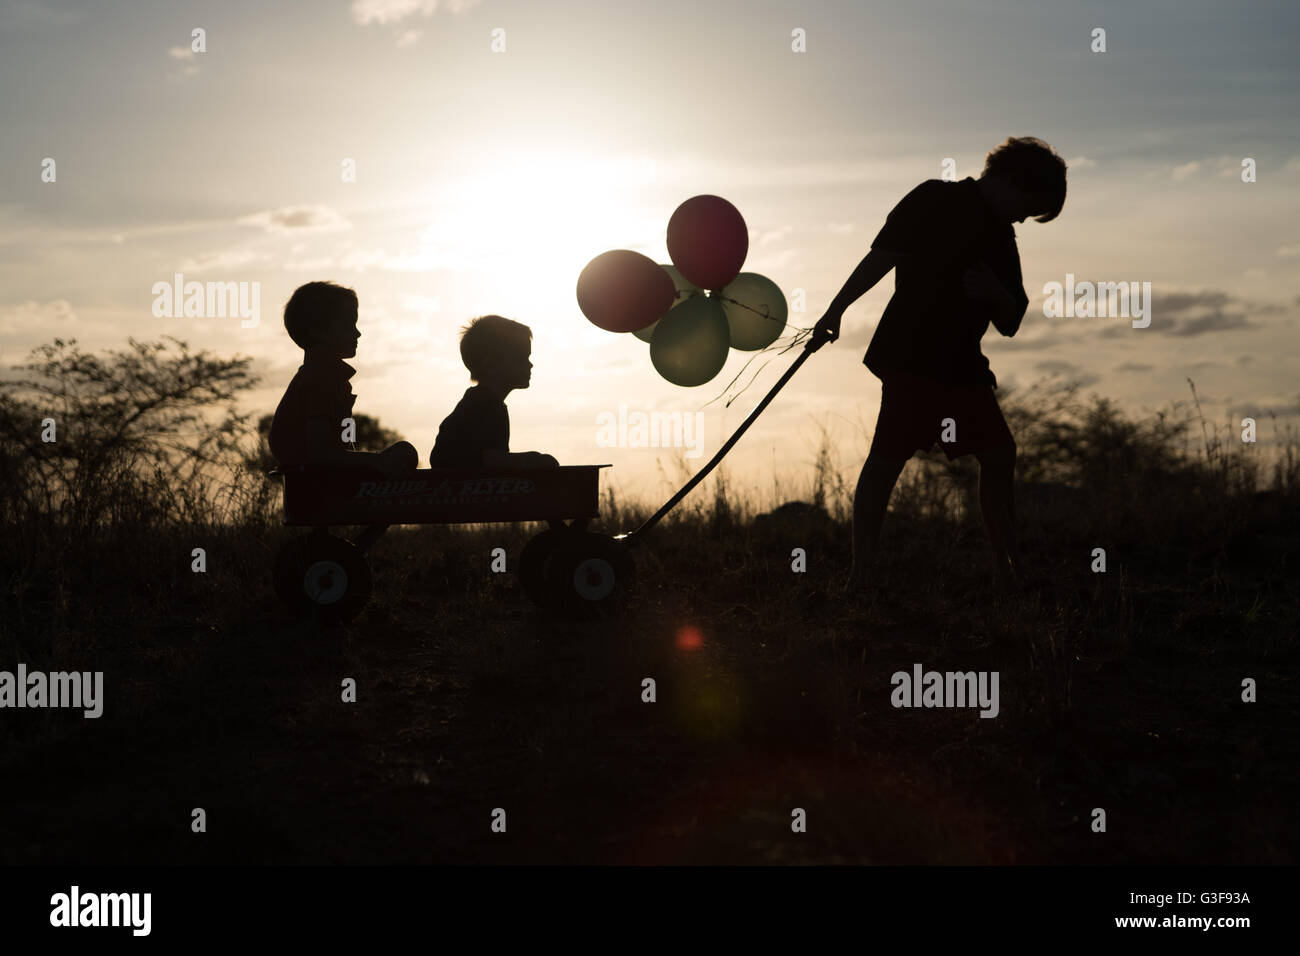 Three boys in silhouette playing with cart on hill Stock Photo